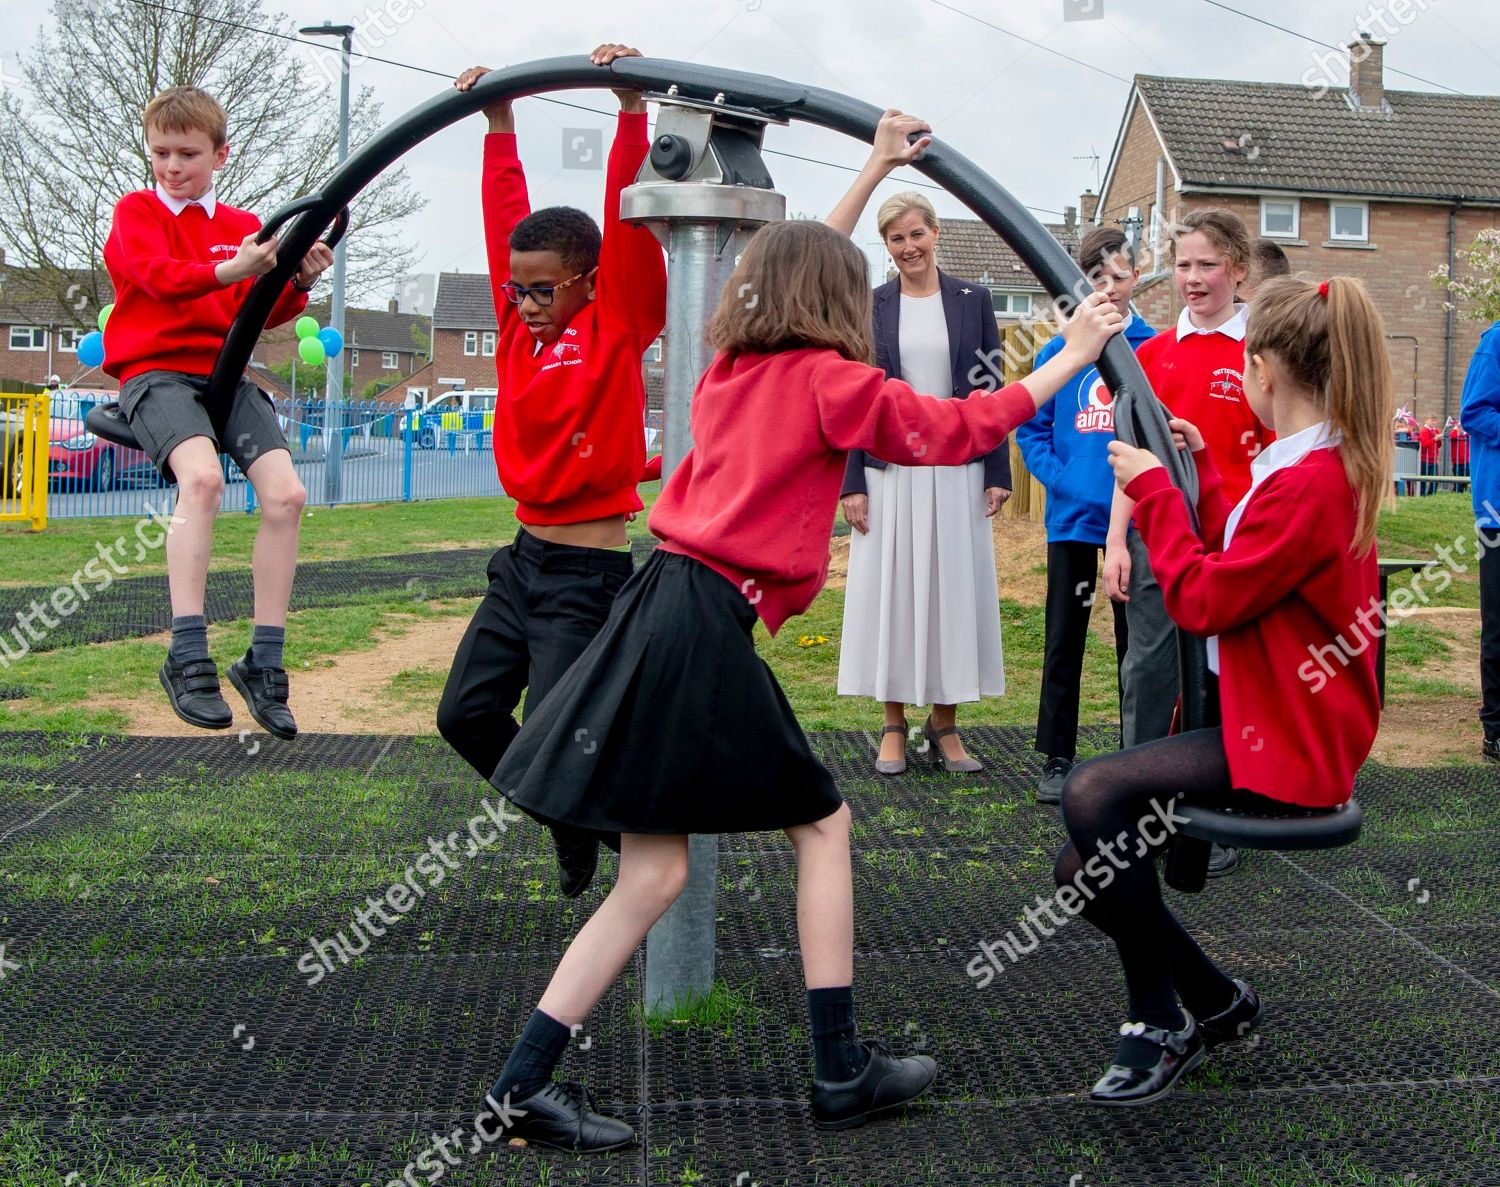 sophie-countess-of-wessex-opens-airplay-play-park-wittering-village-peterborough-uk-shutterstock-editorial-10217568as.jpg